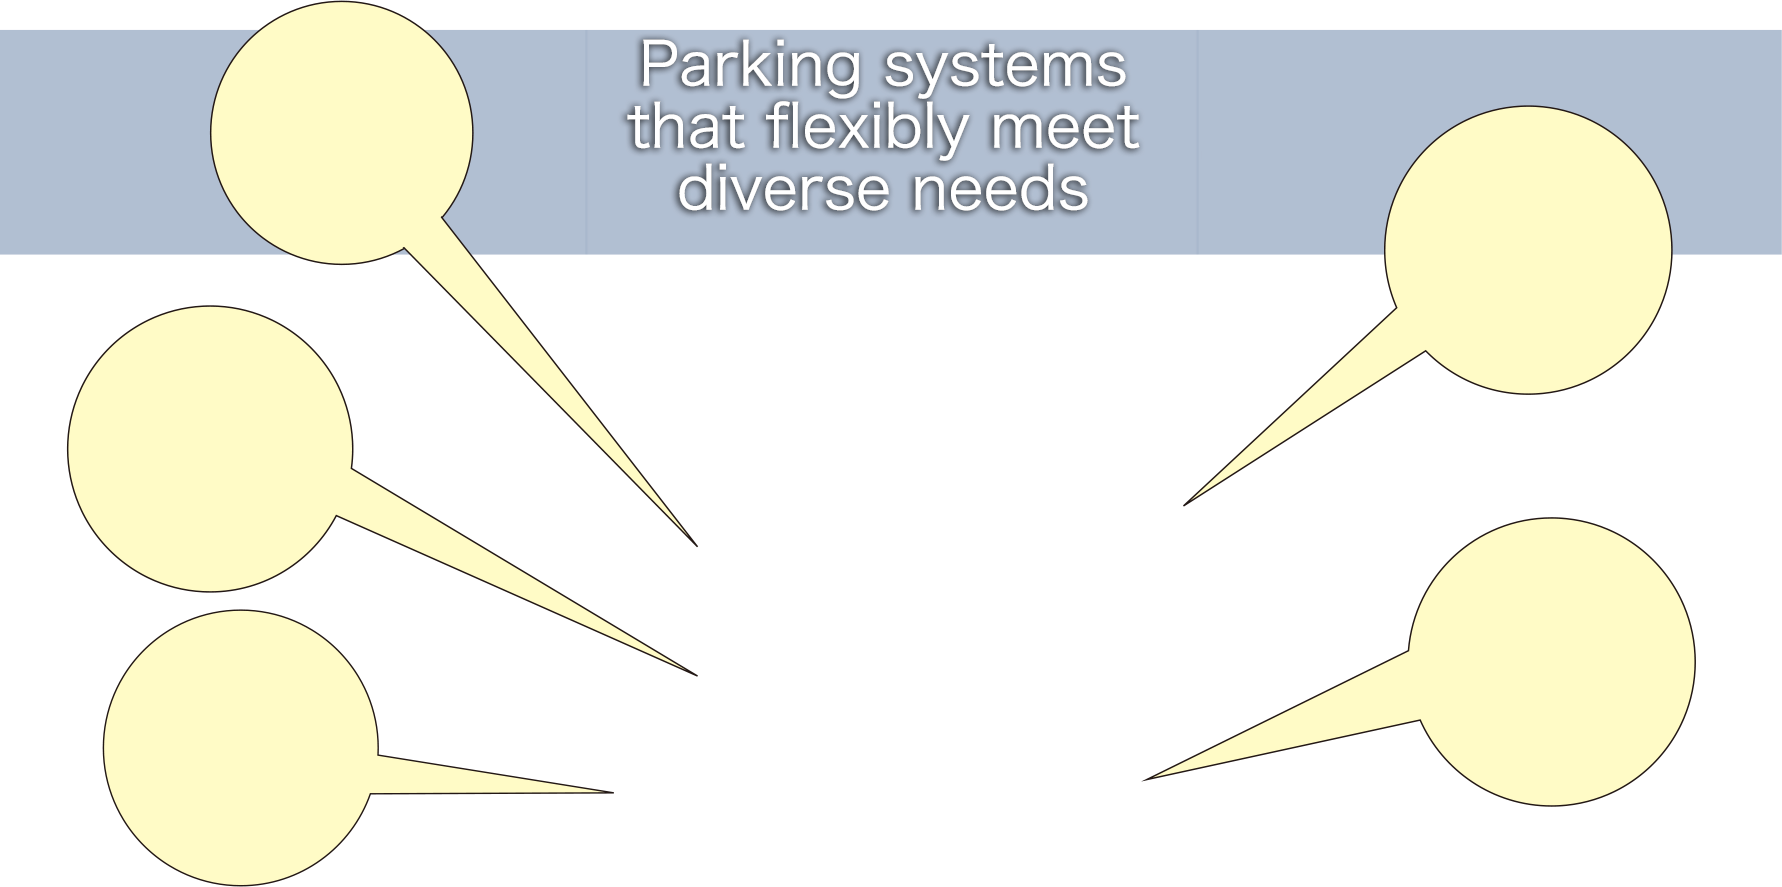 Parking systems that flexibly meet diverse needs